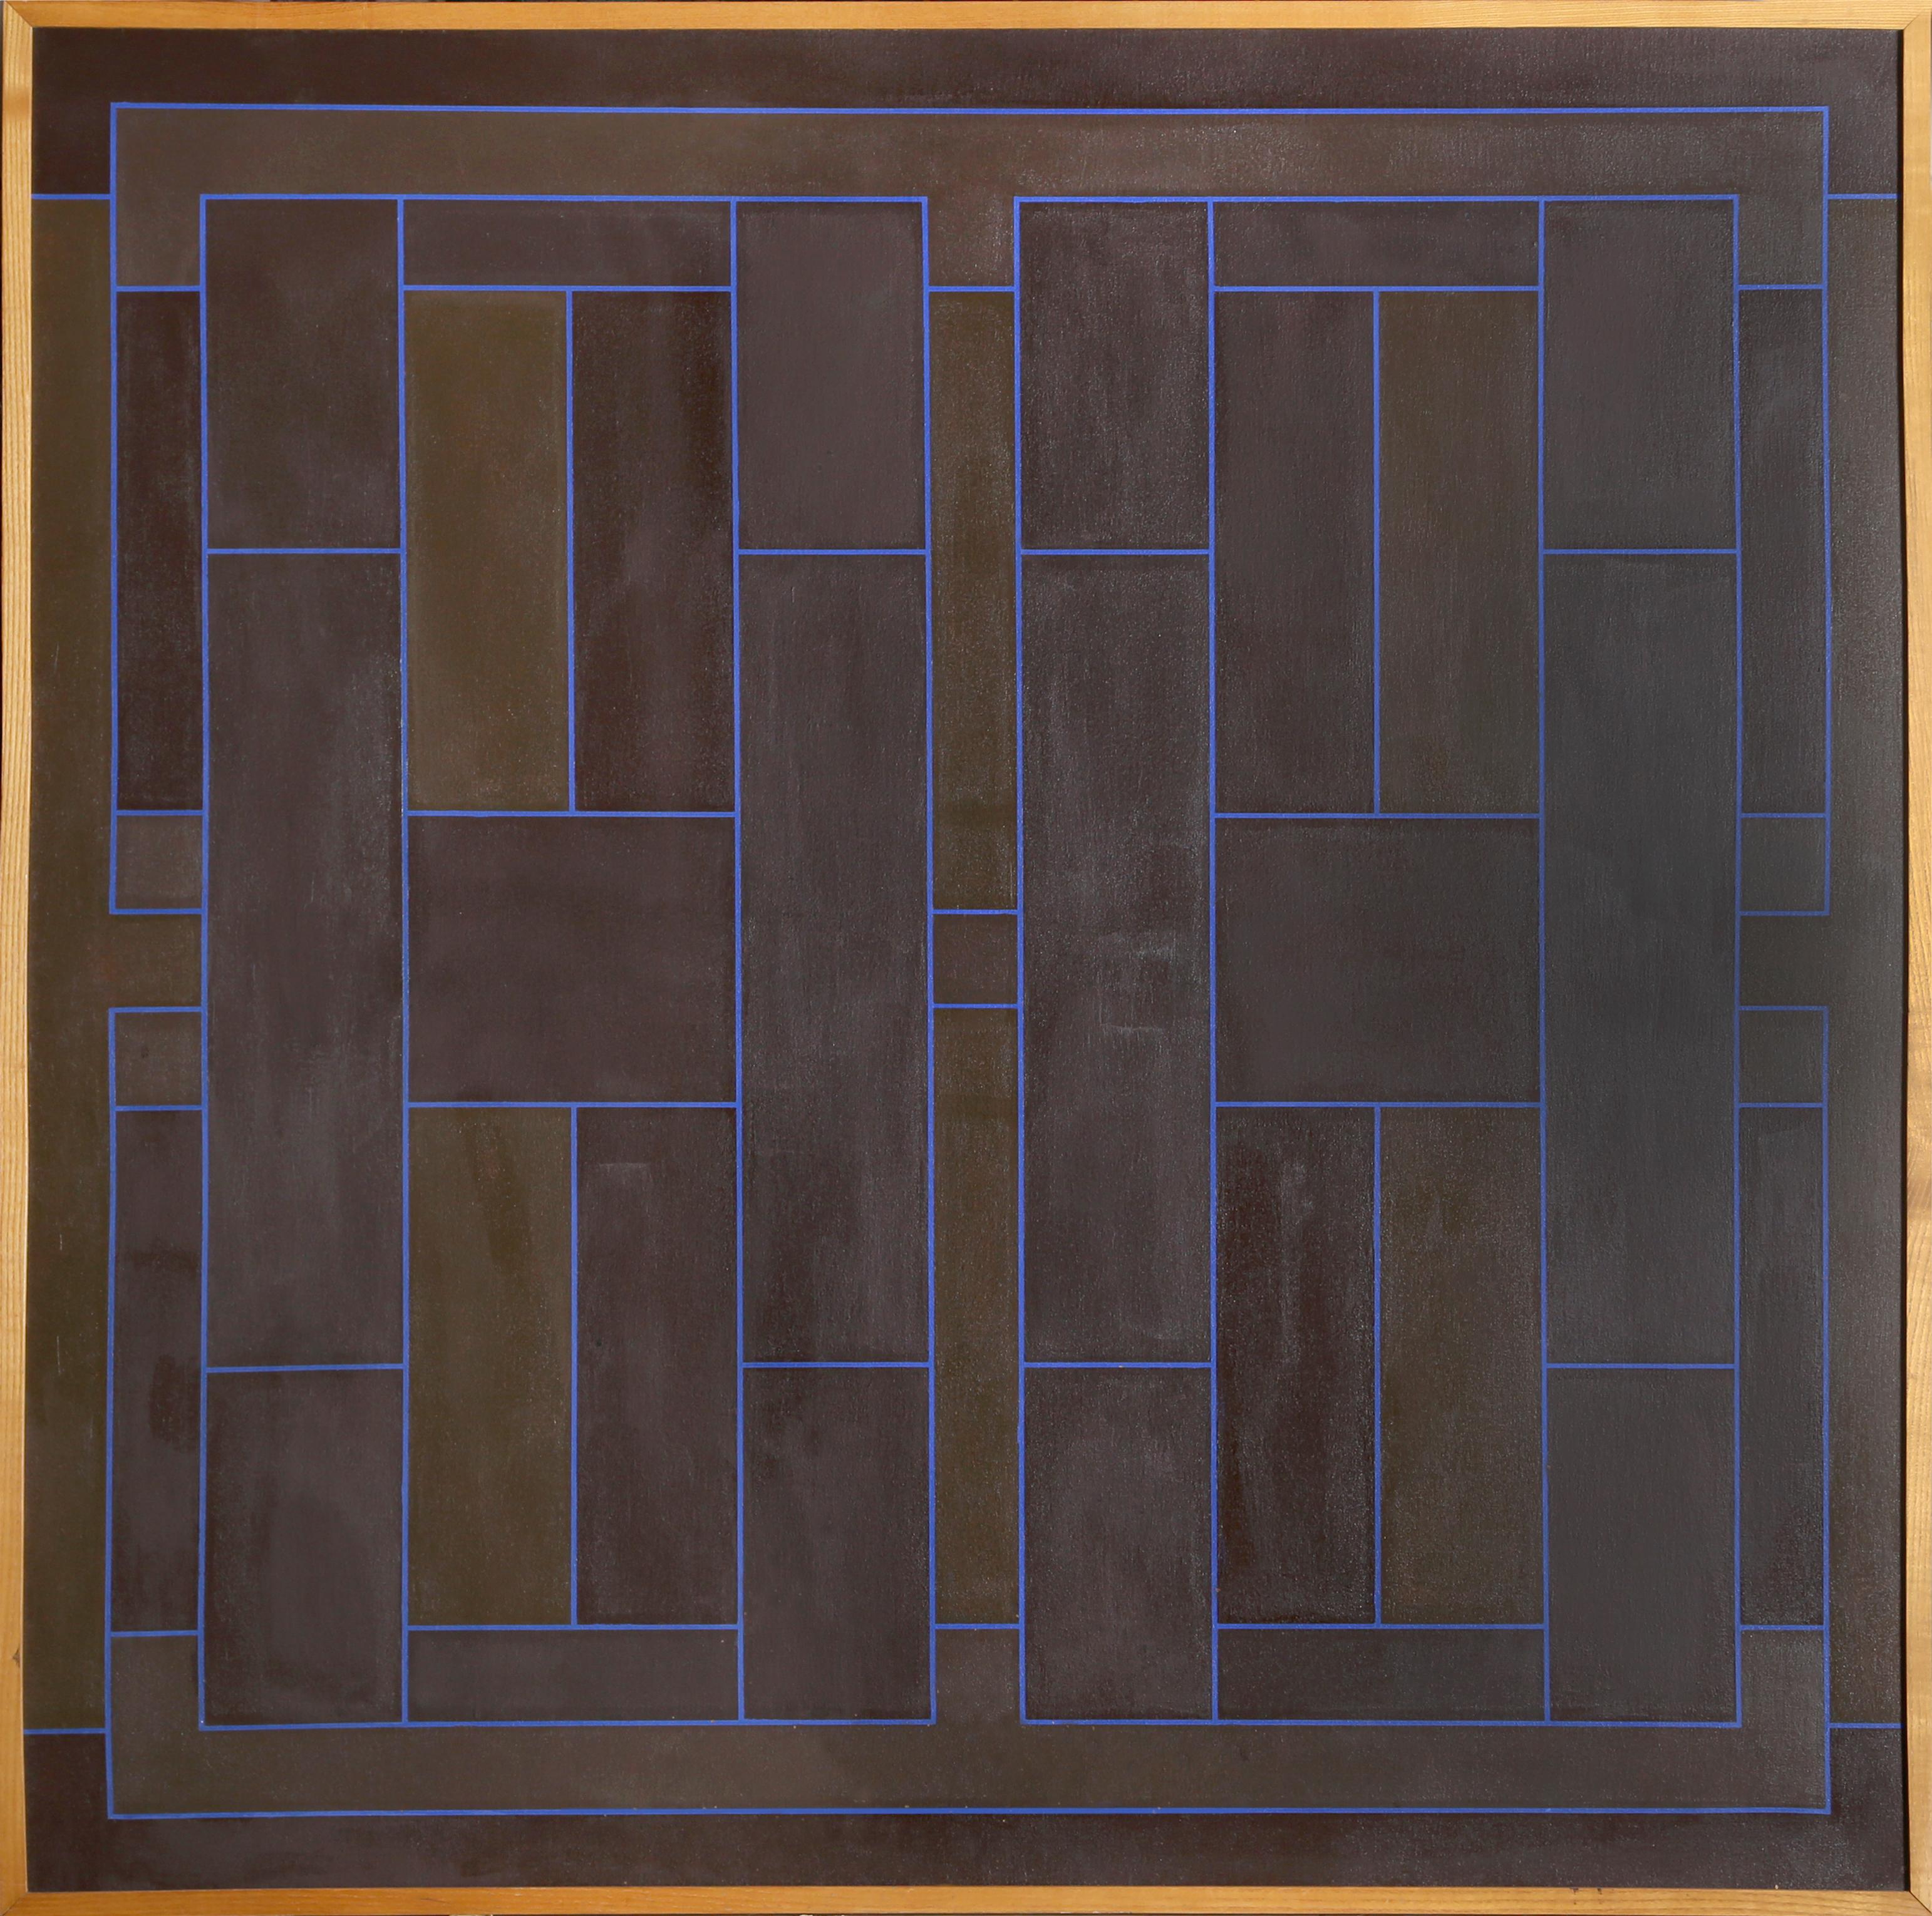 Artist: Peter Stroud, British (1921 - 2012)
Title: Blue on Brown Overlap
Year: 1971
Medium: Acrylic on Canvas, signed, dated and titled verso 
Size: 48 x 48 inches